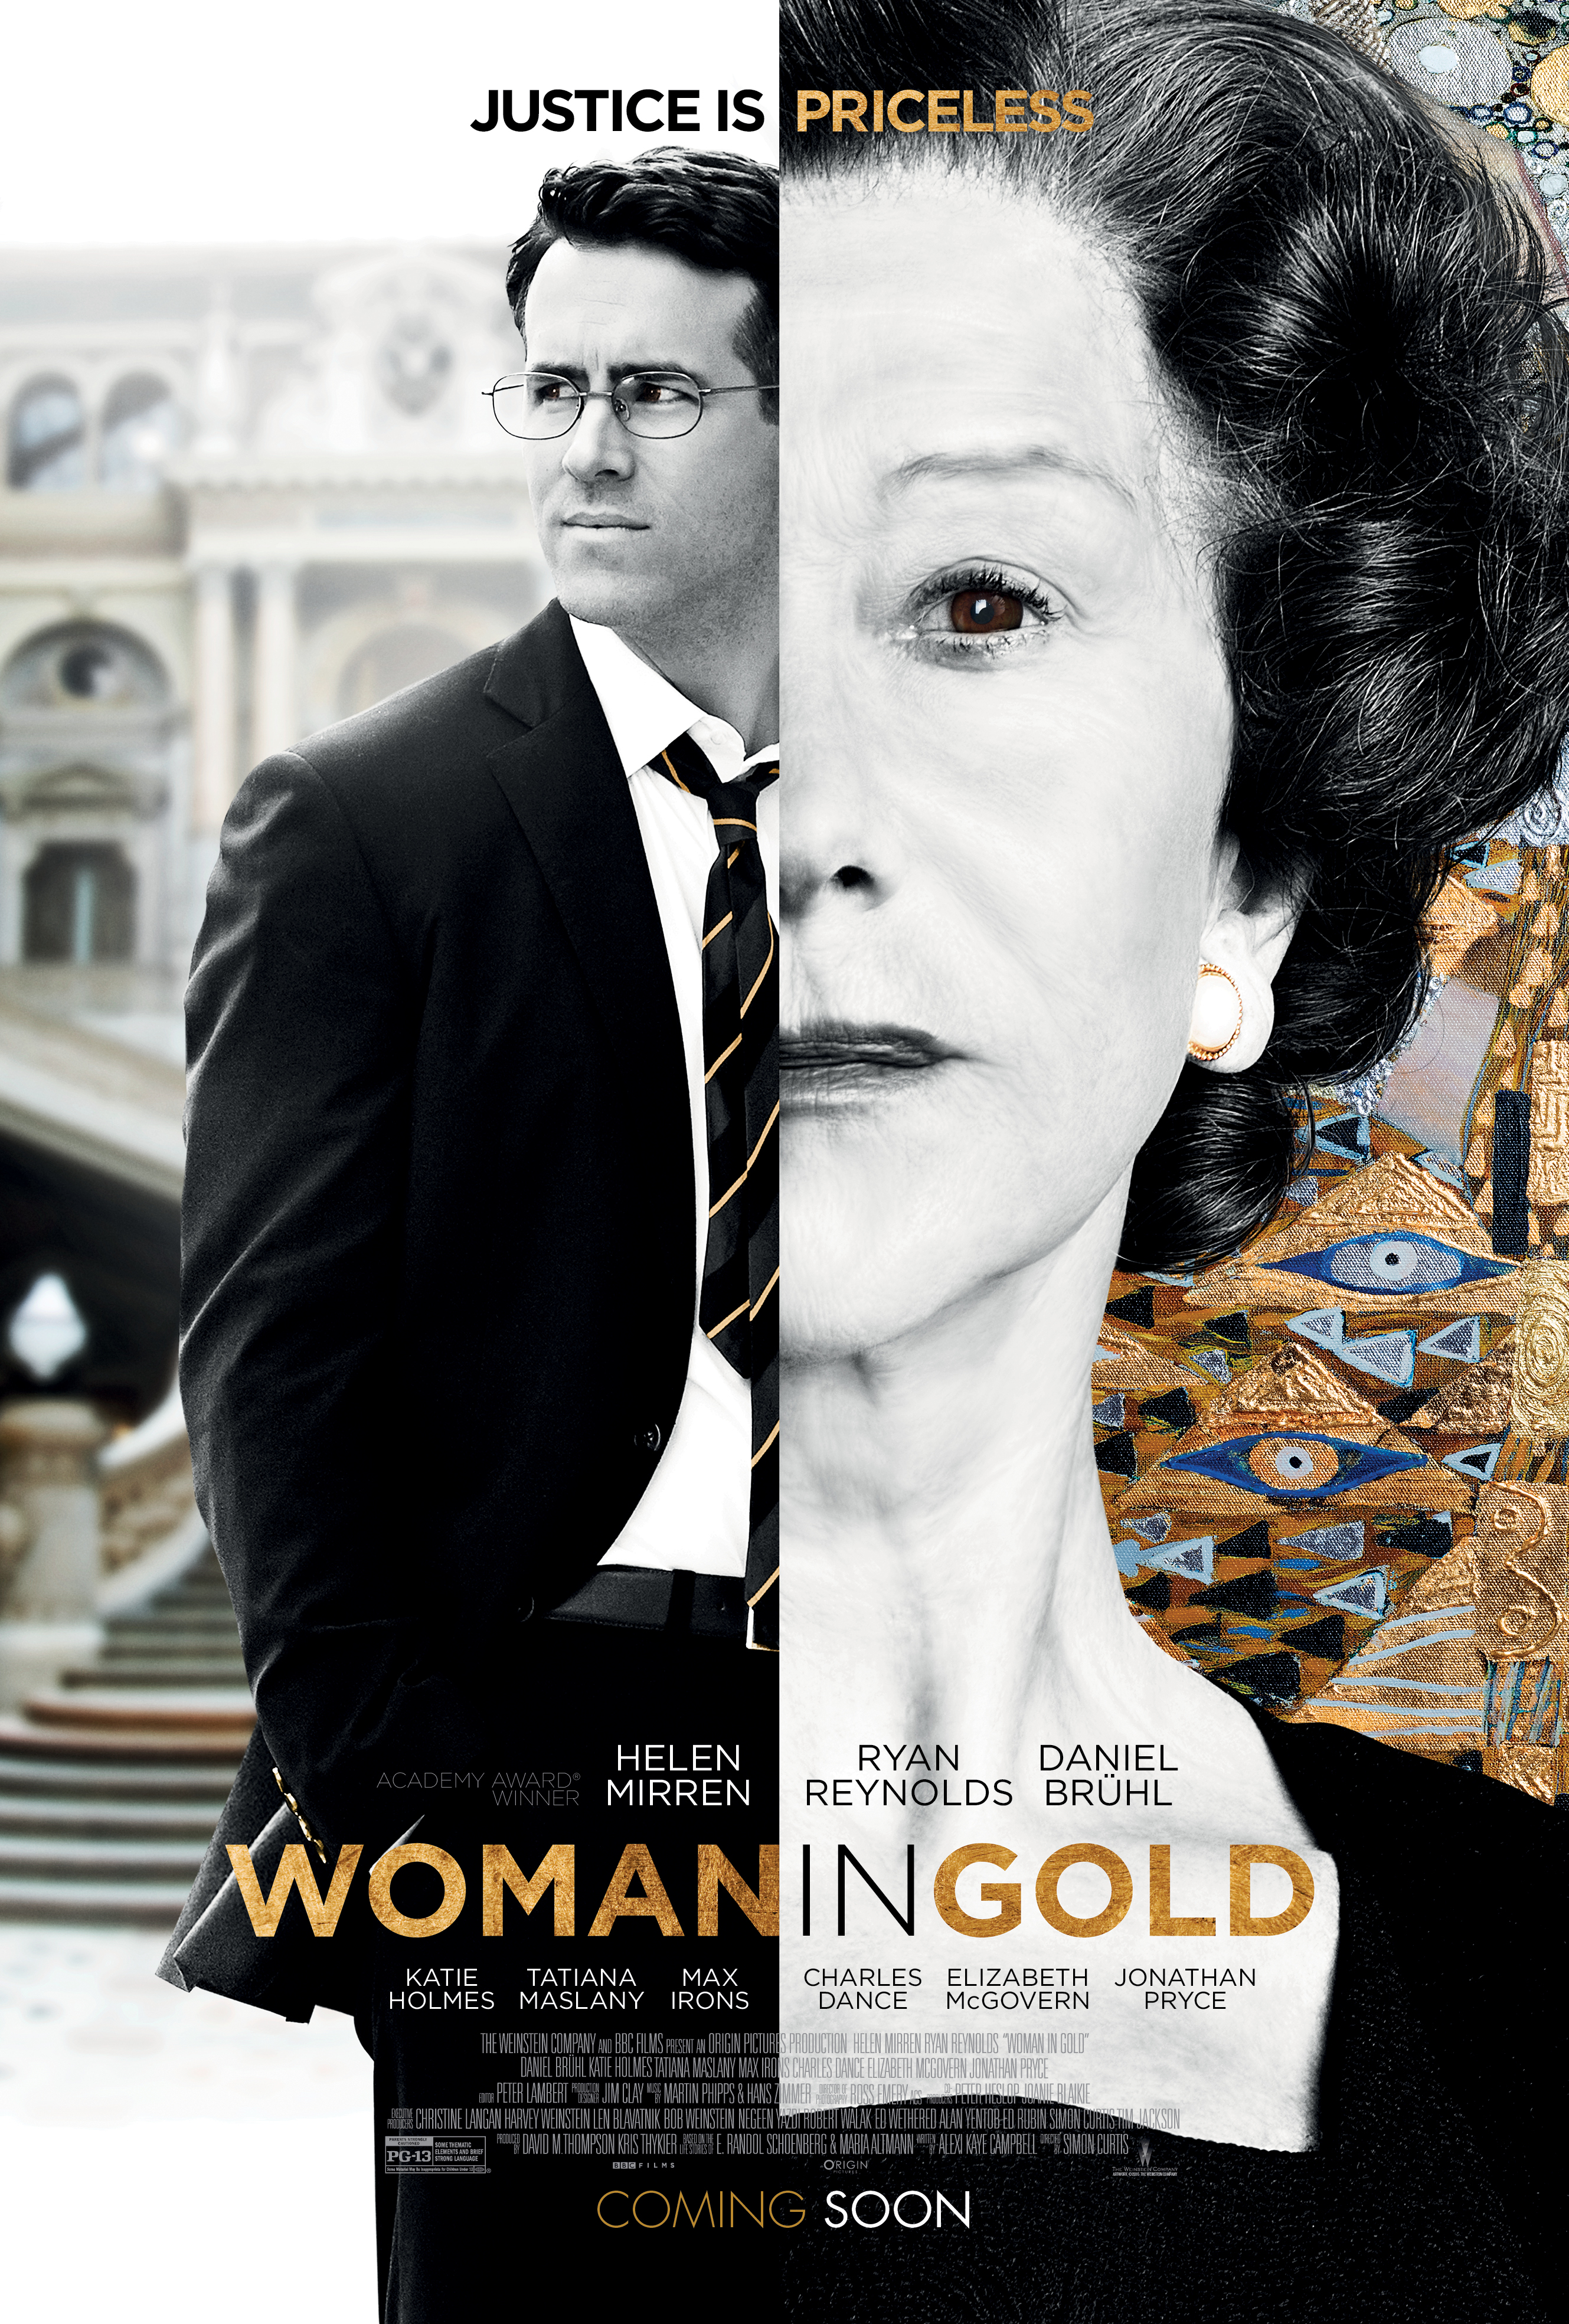 Woman in Gold39; Releases Poster | FangirlNation Magazine